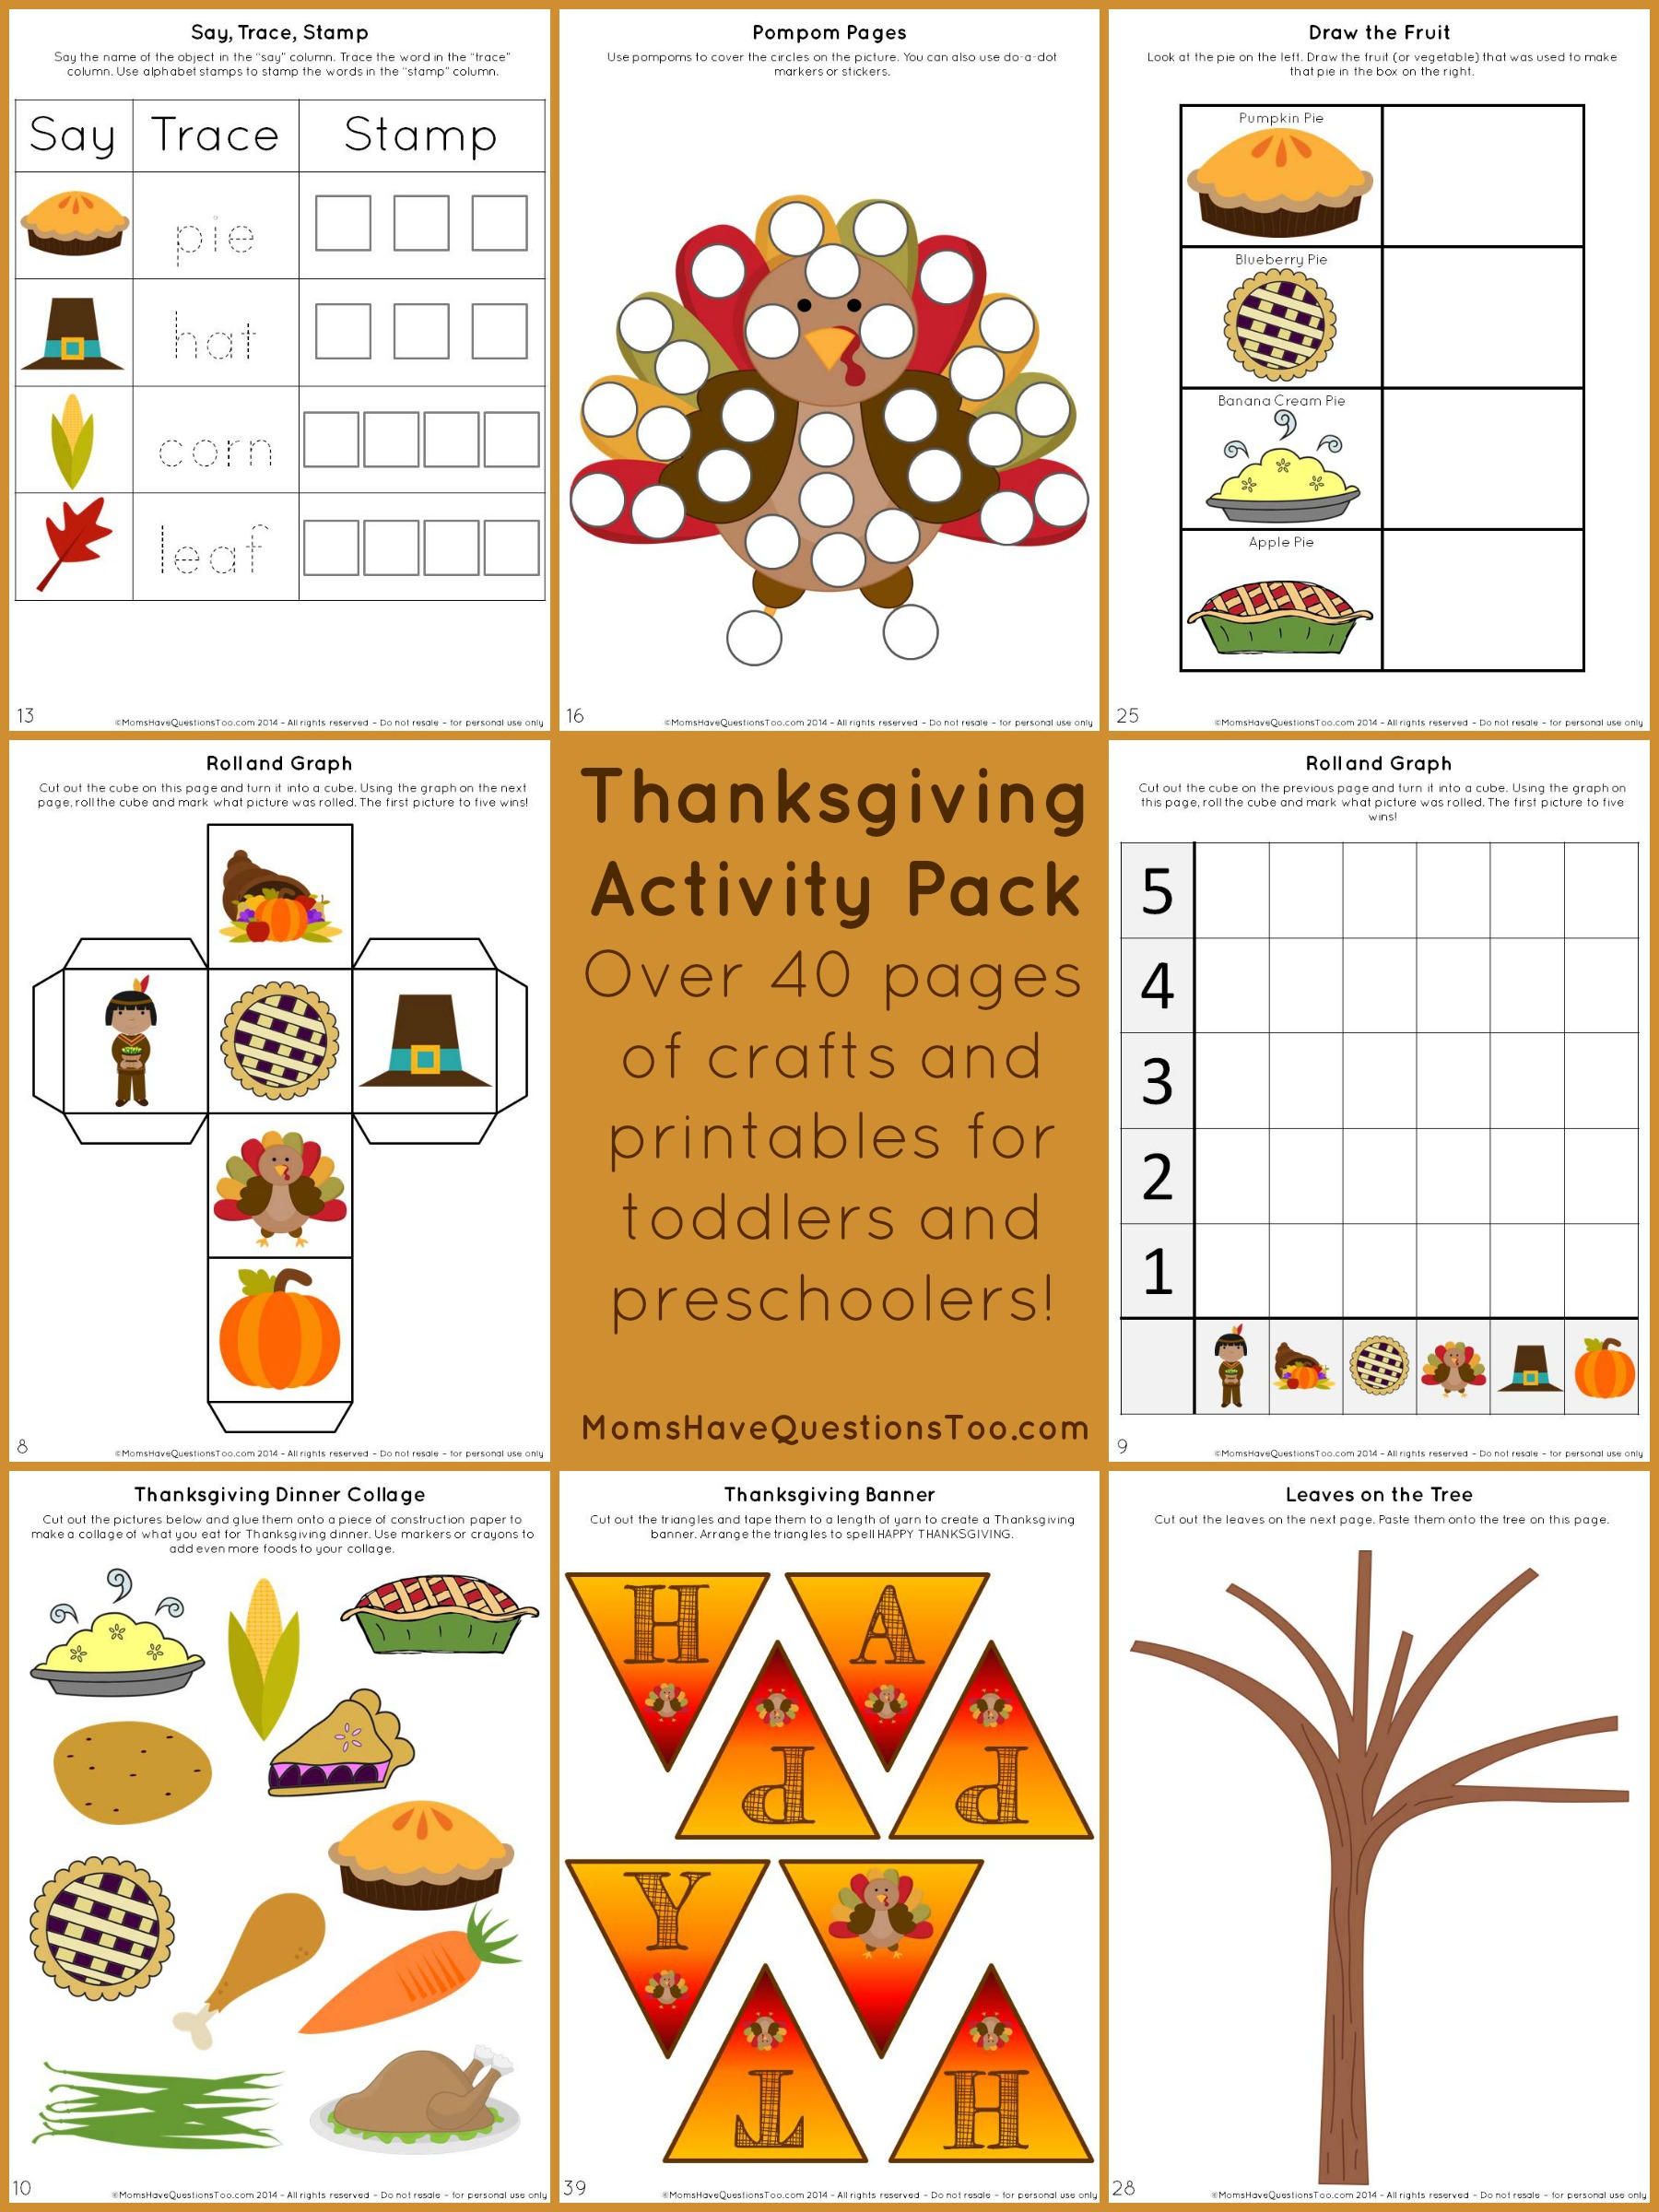 Thanksgiving Activity Pack with Crafts and Printables - Thanksgiving Activity Pages And Games